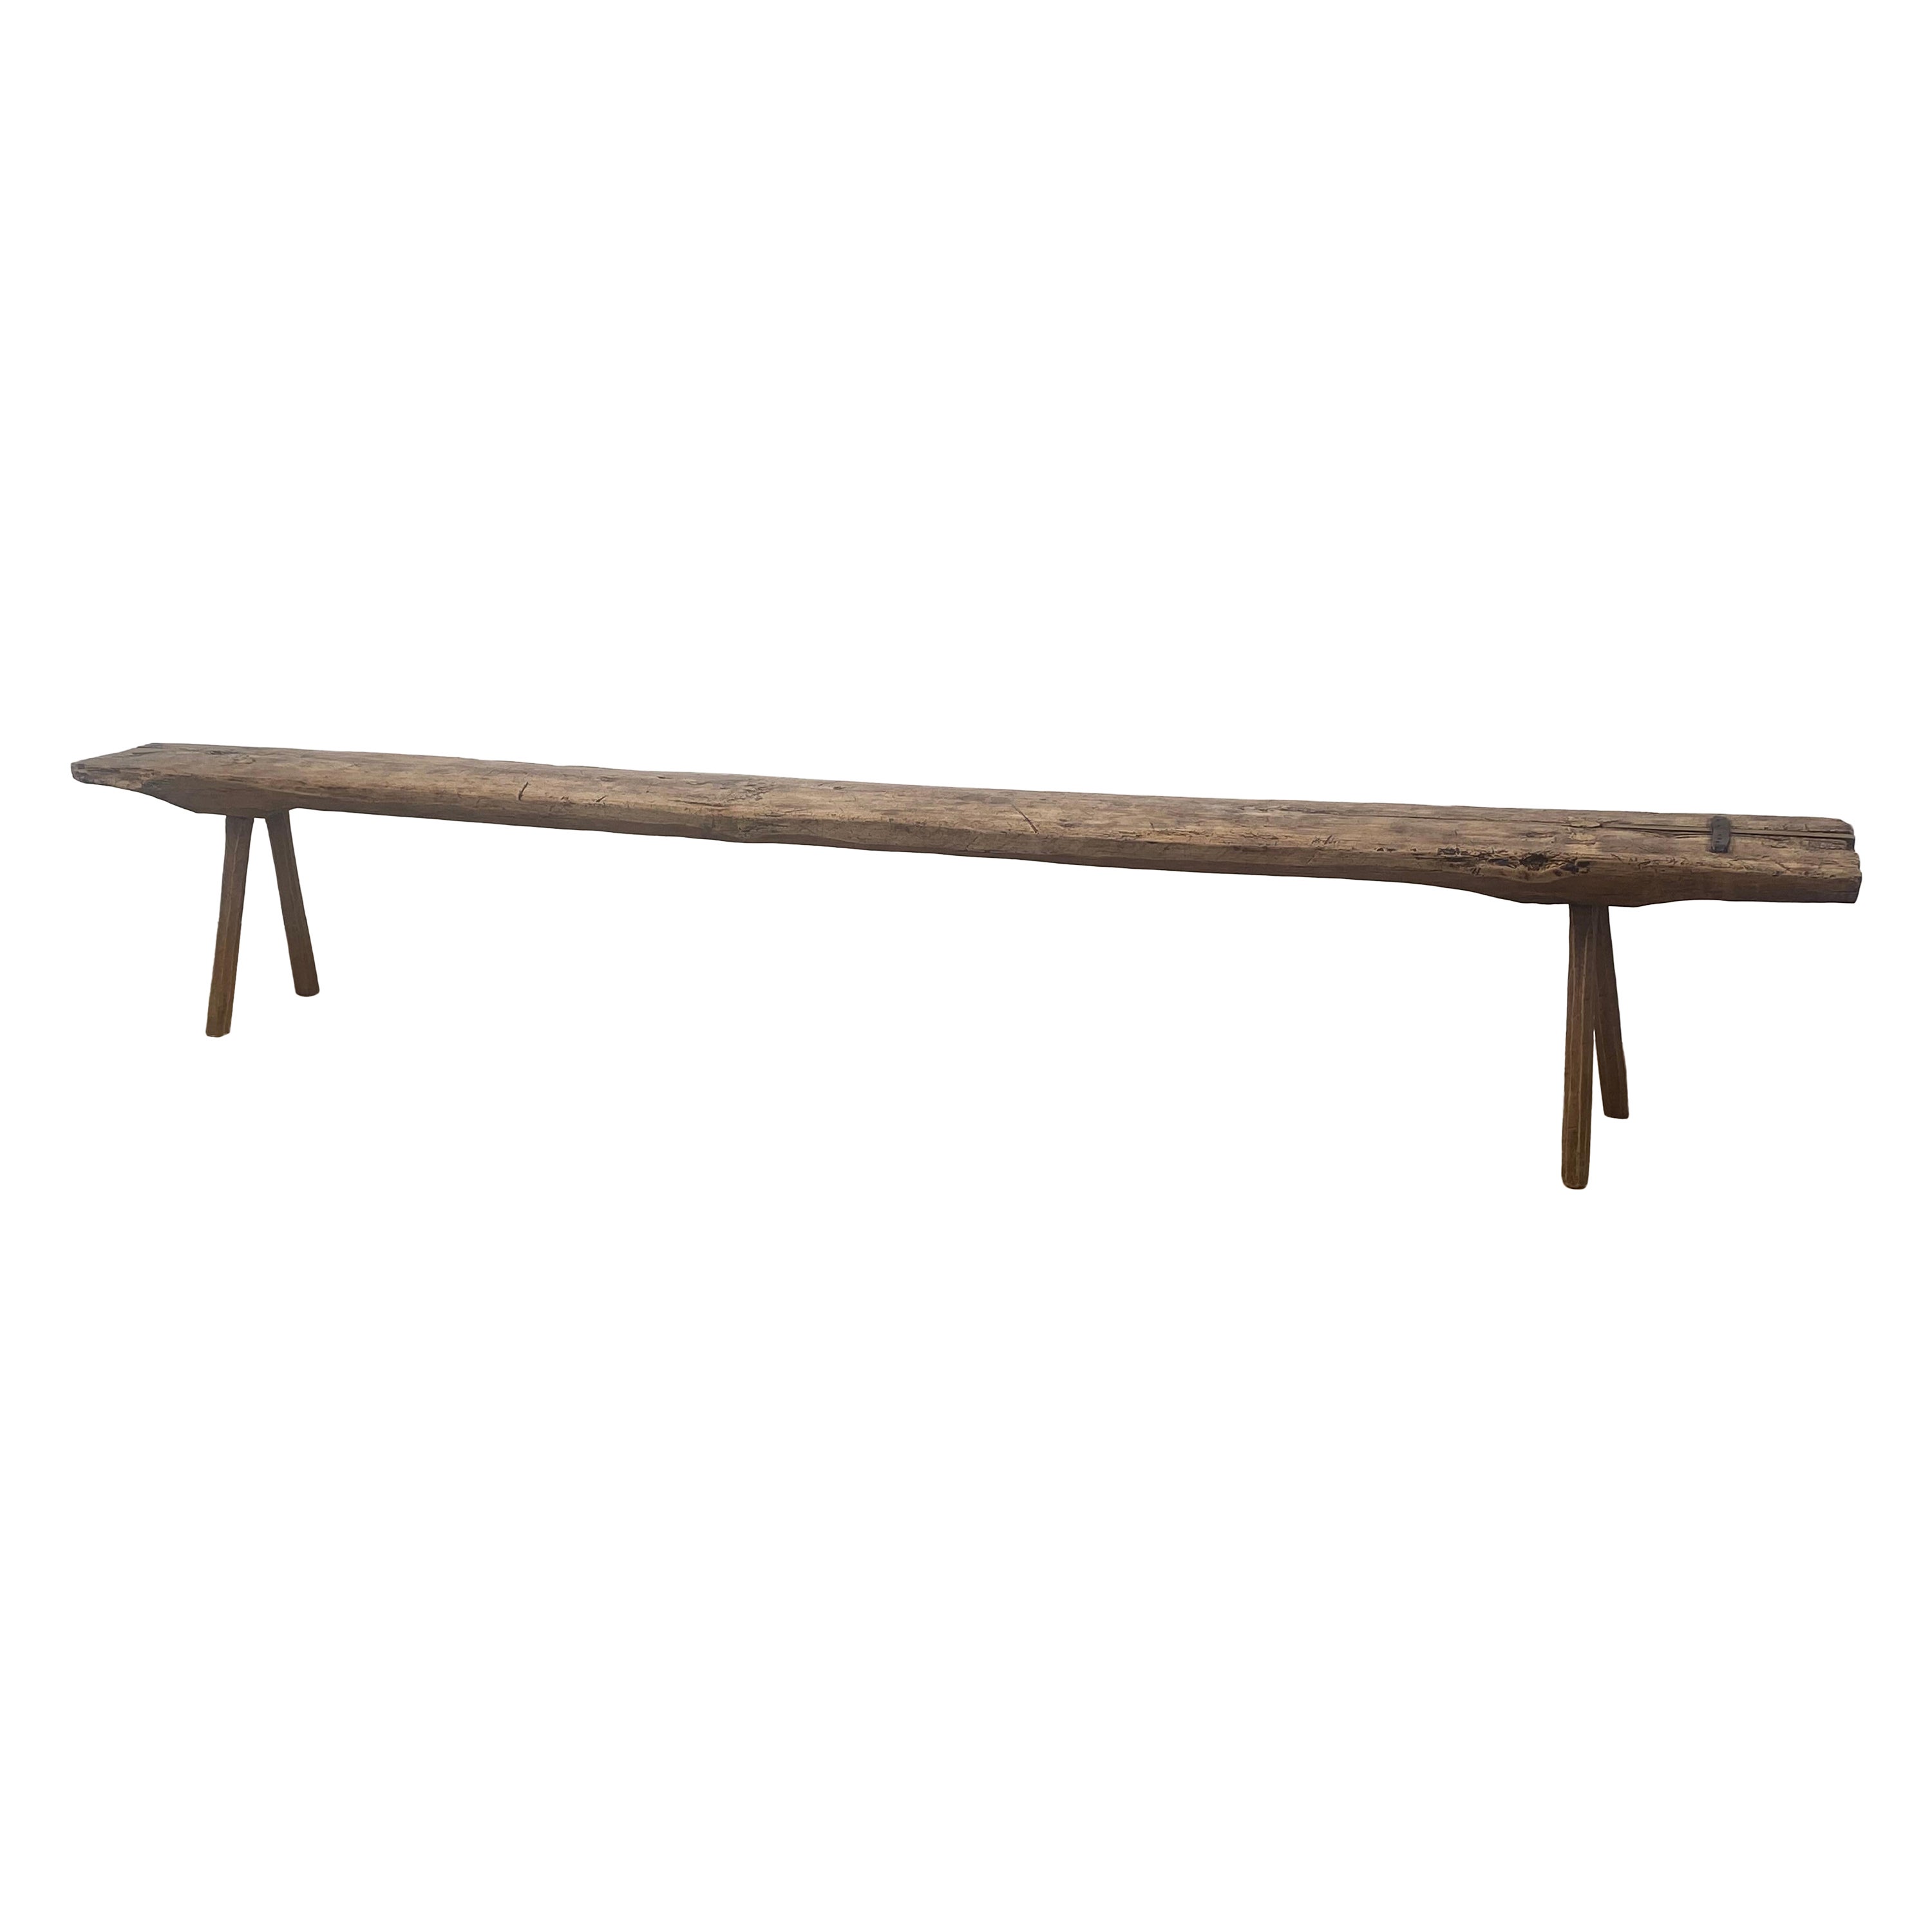 Italian Brutalist Farmers Bench in A Bleached Fruitwood